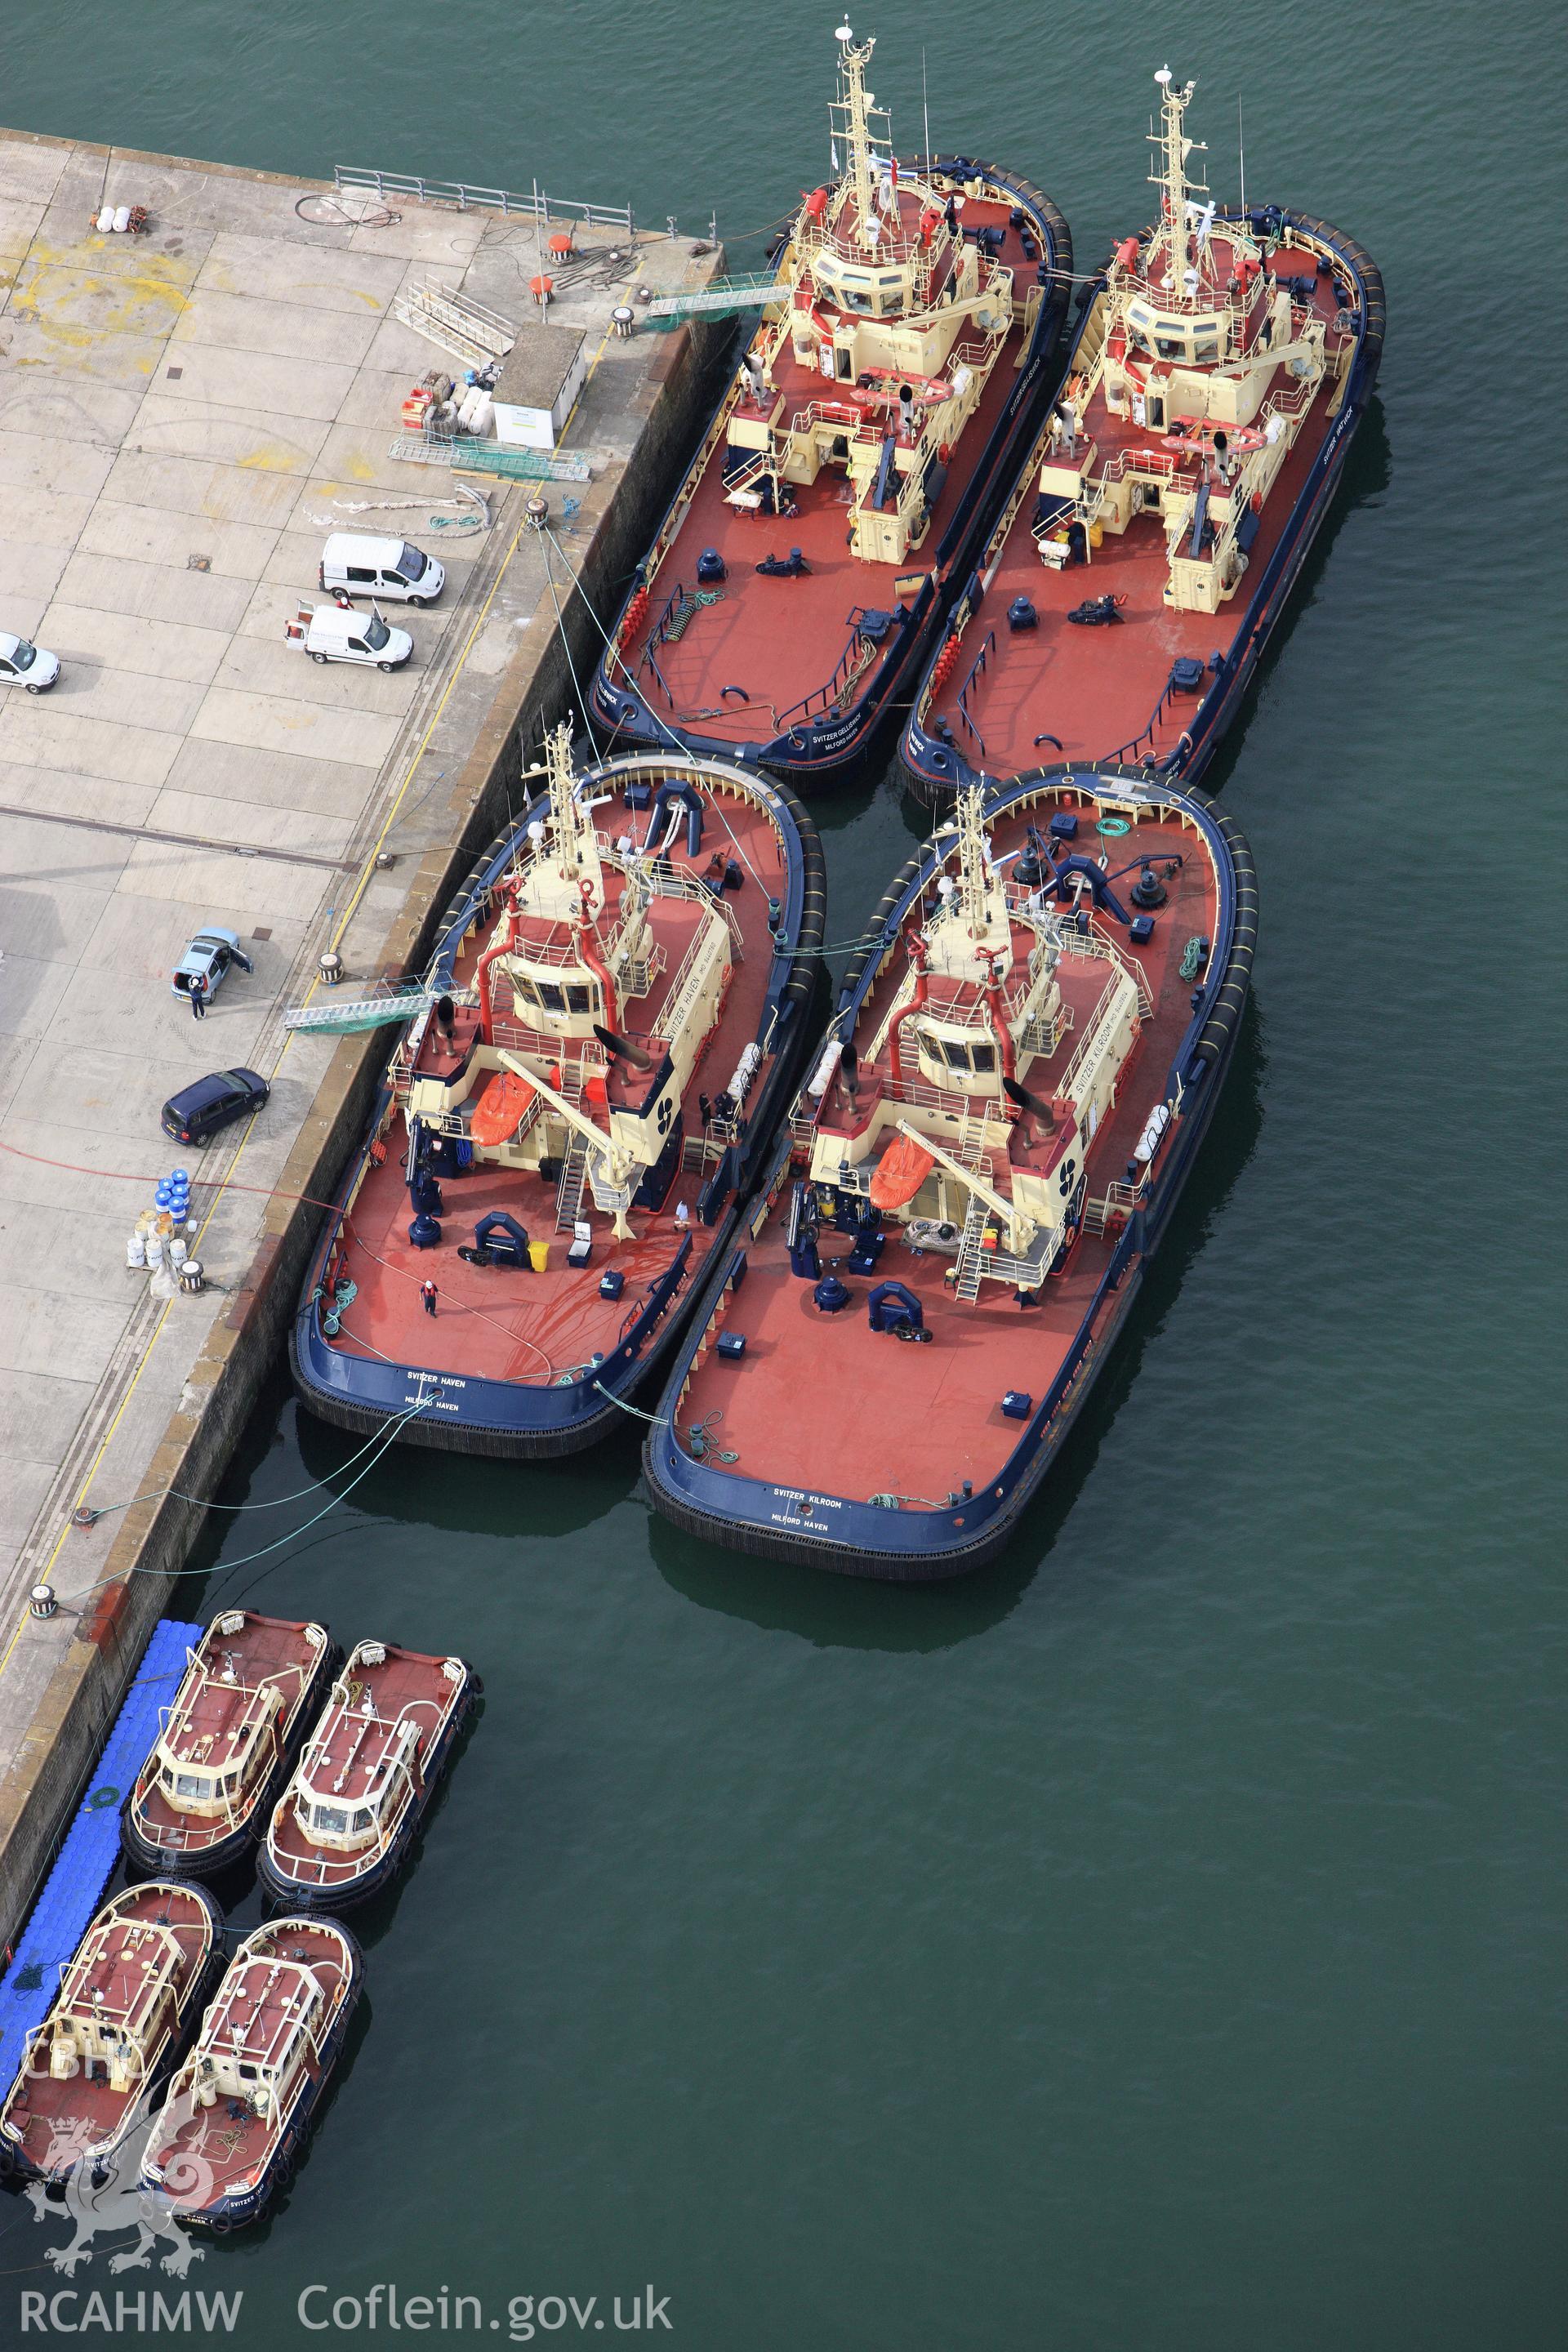 RCAHMW colour oblique aerial photograph of The Royal Dockyard at Pembroke Dock showing Port Authority tugs. Taken on 14 October 2009 by Toby Driver